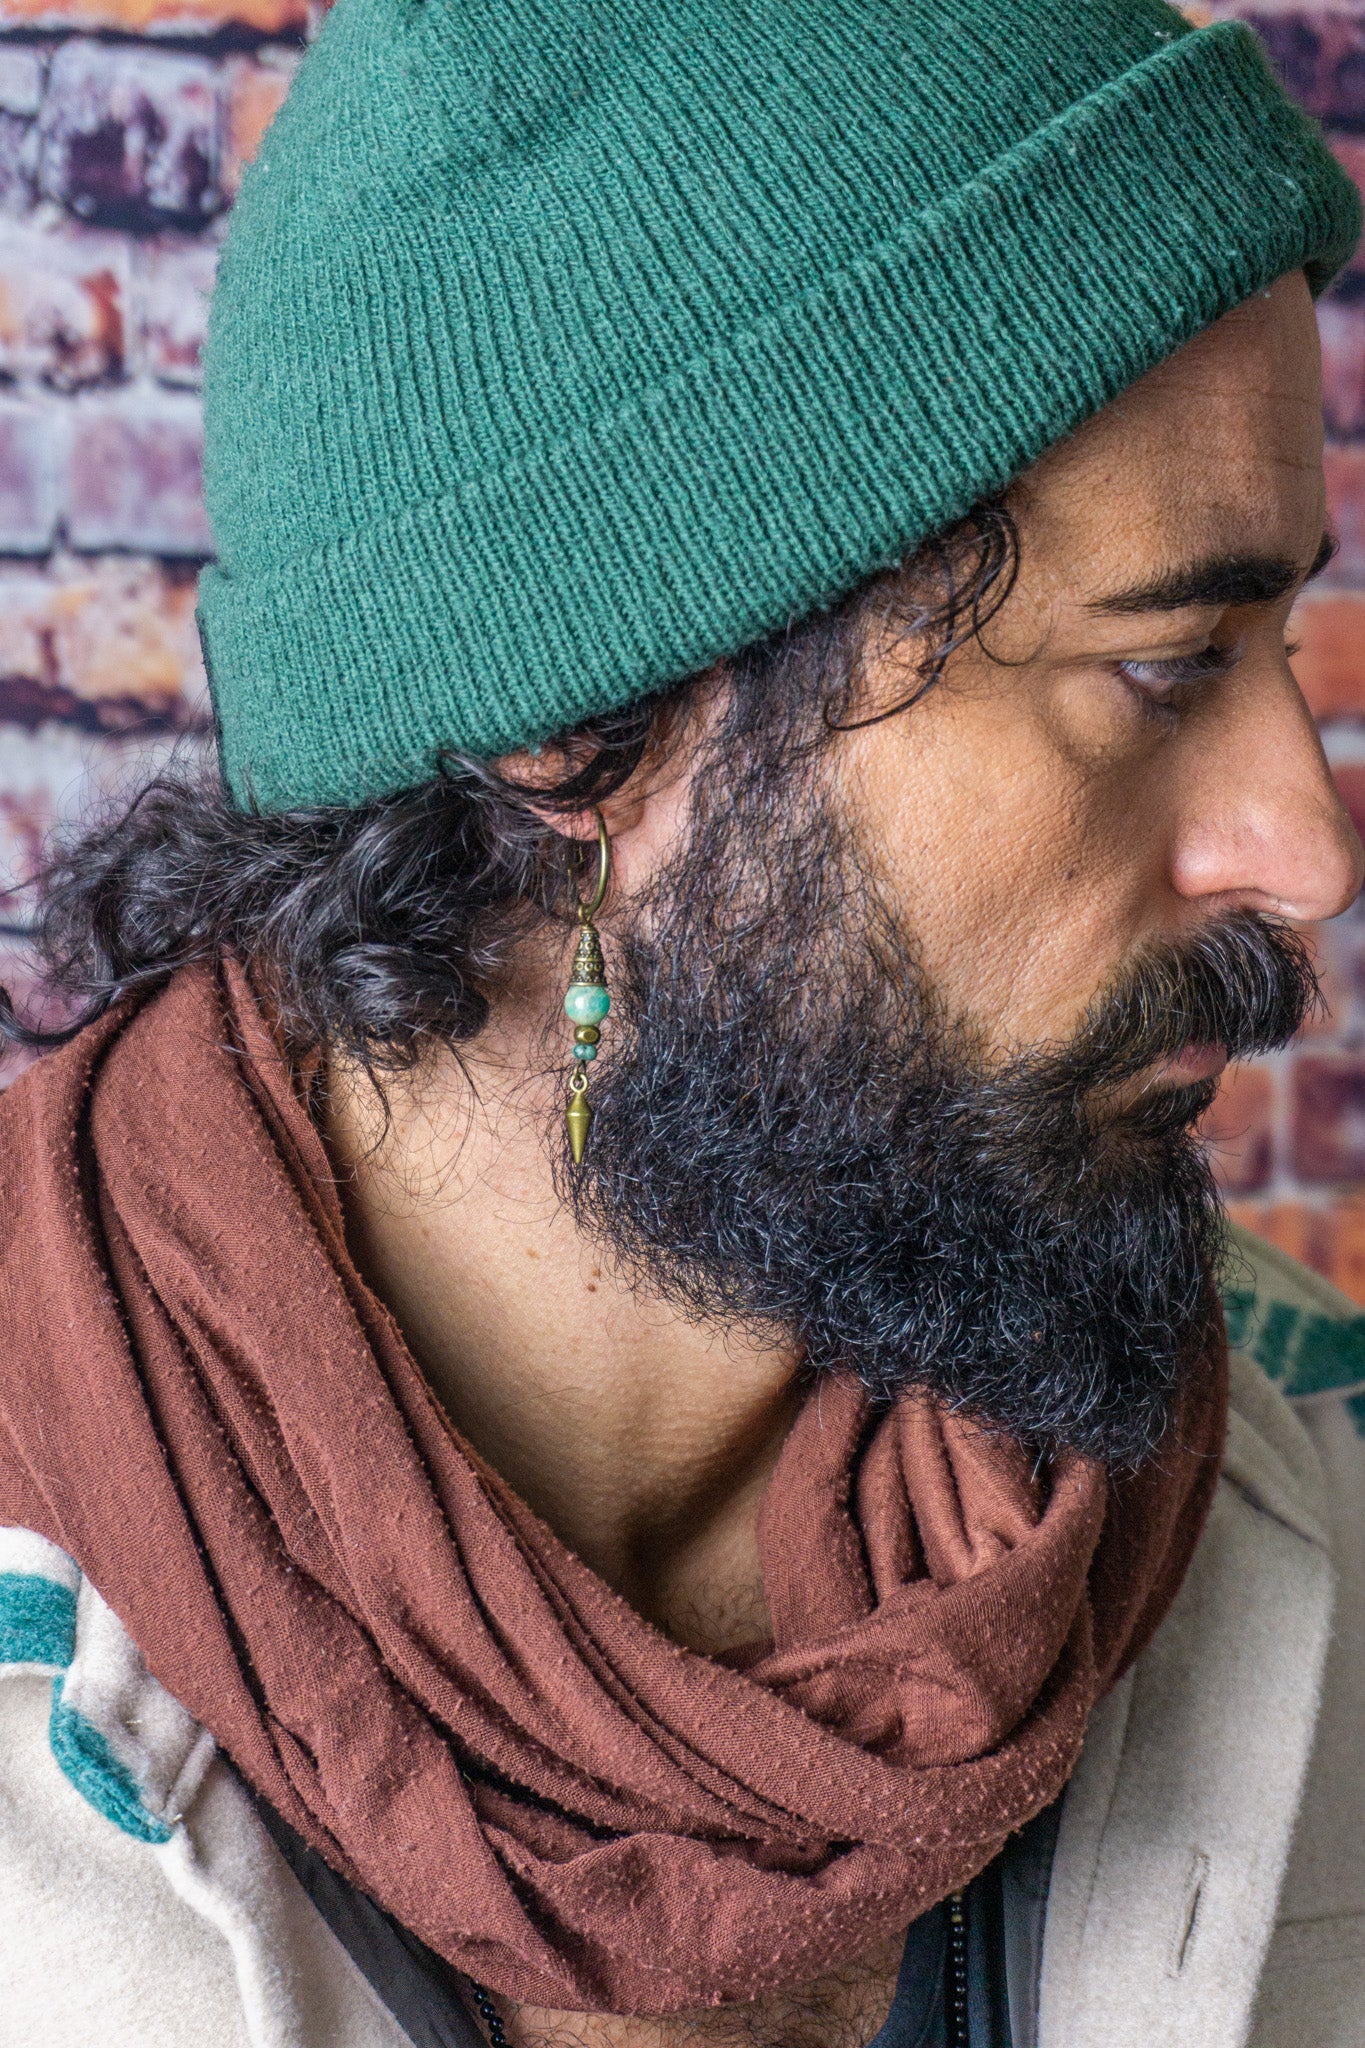 A man with a green beanie, brown scarf and a dangling earring with a green stone and a little bronze spike- wander jewellery